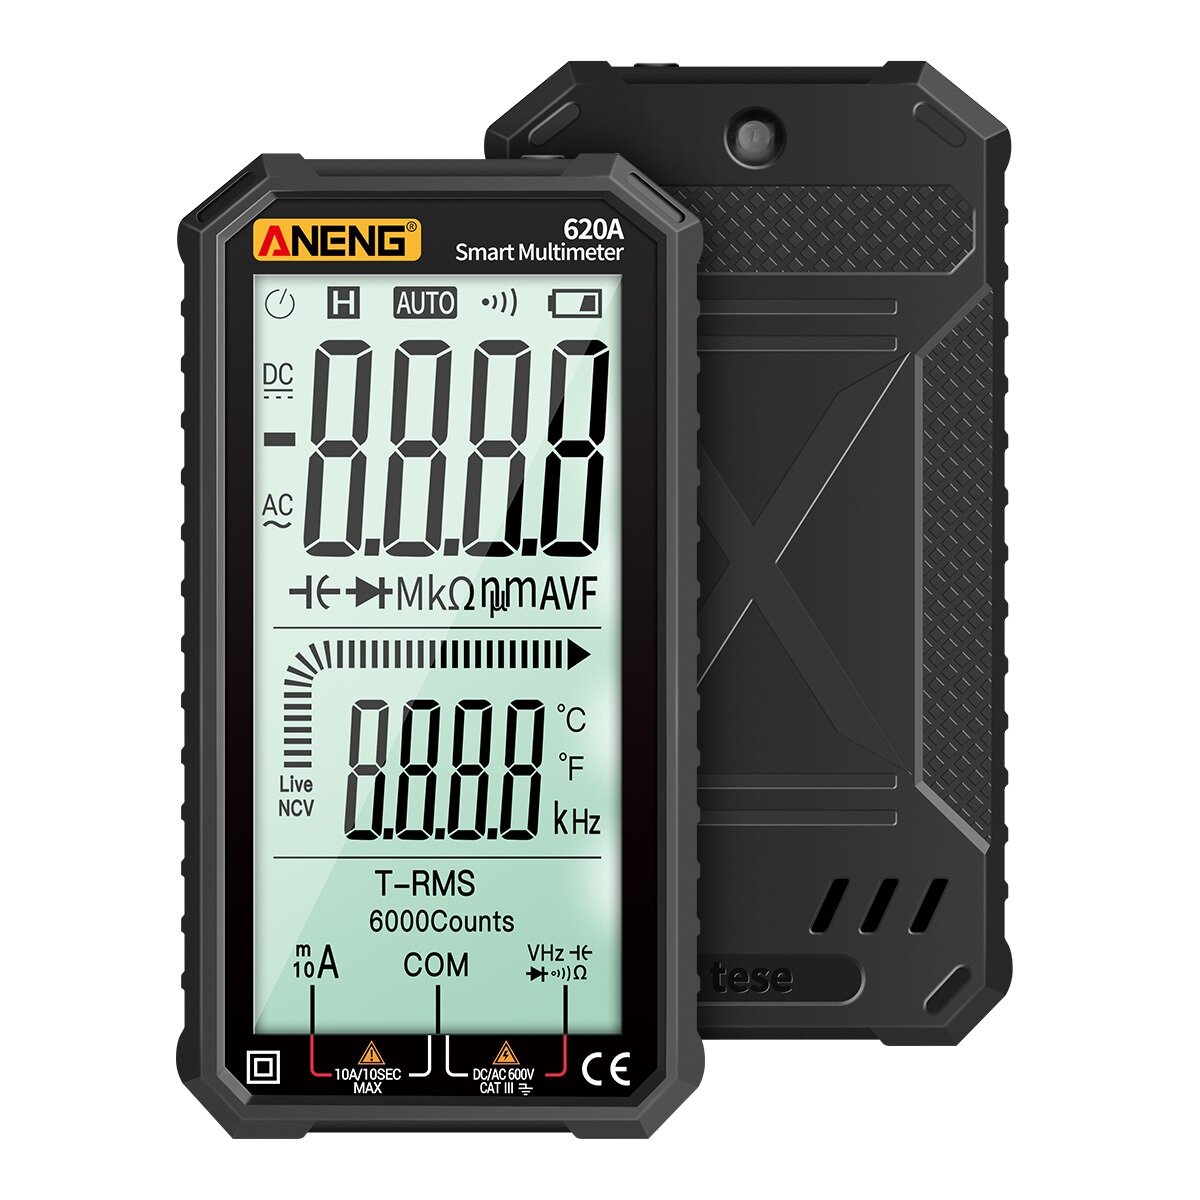 ANENG 620A 4.7-inch Large LCD Screen Automatic + Manual Intelligent True RMS Digital Multimeter Resi